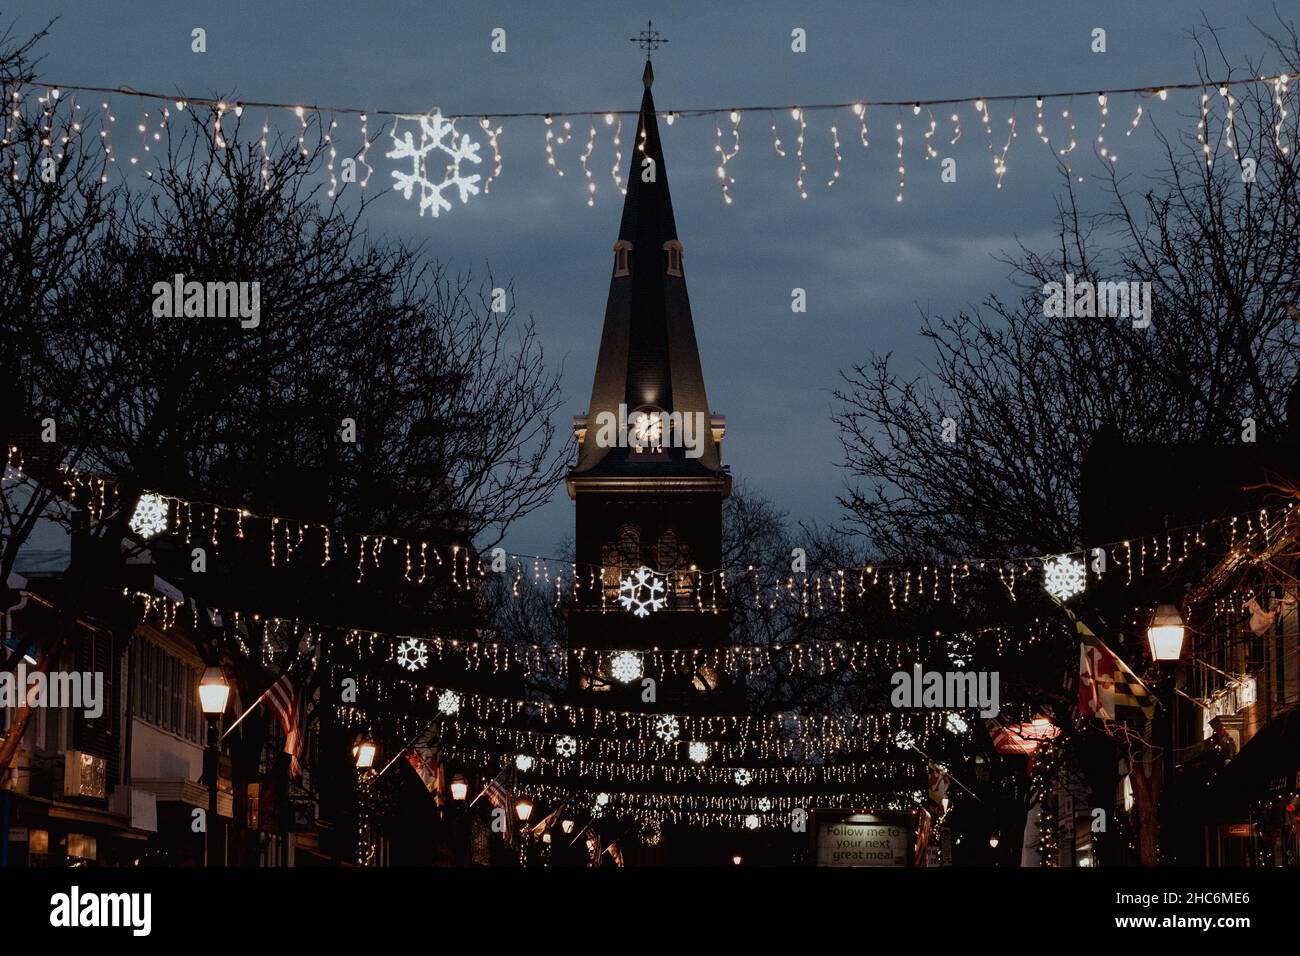 Historic St. Anne's Episcopal Church in Annapolis, MD pictured at Christmas time. Stock Photo